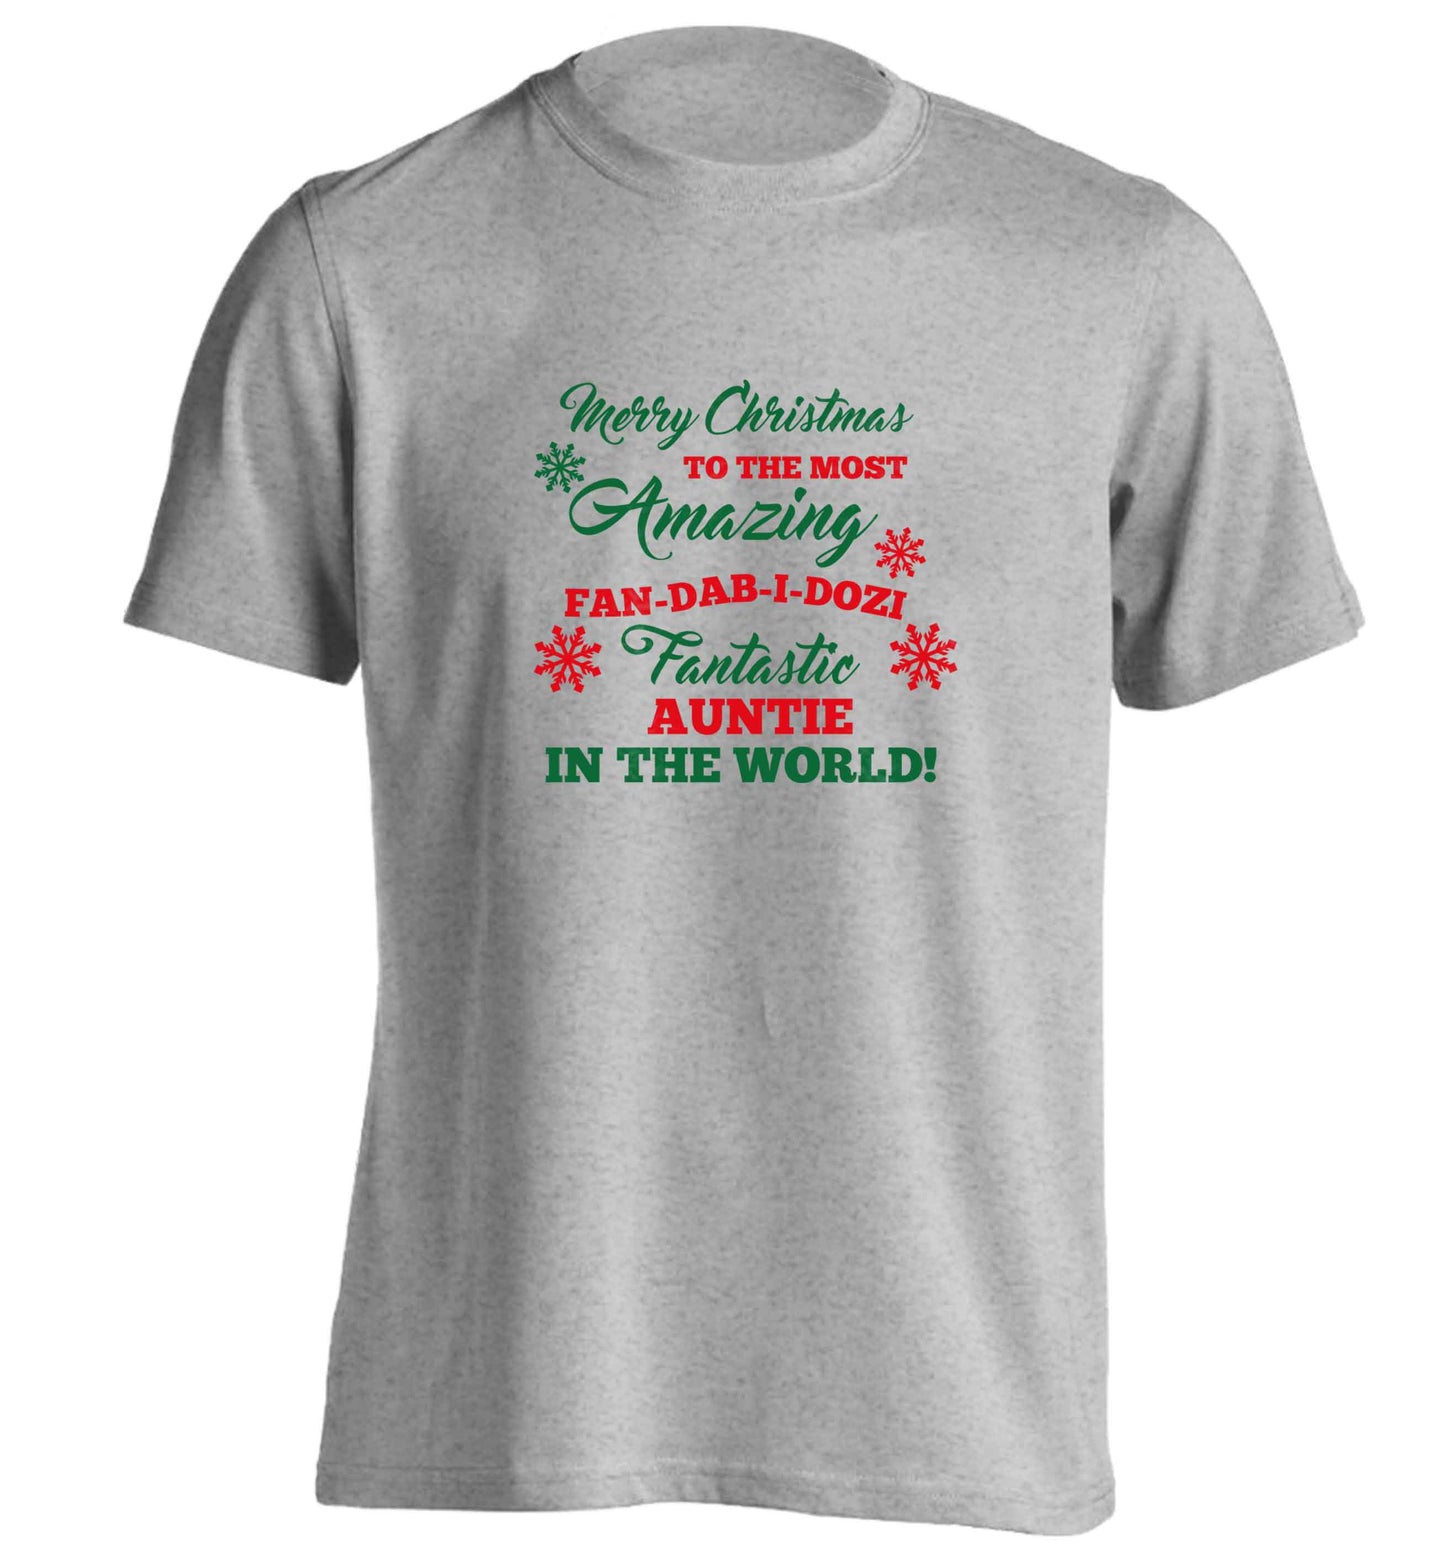 Merry Christmas to the most amazing fan-dab-i-dozi fantasic Auntie in the world adults unisex grey Tshirt 2XL